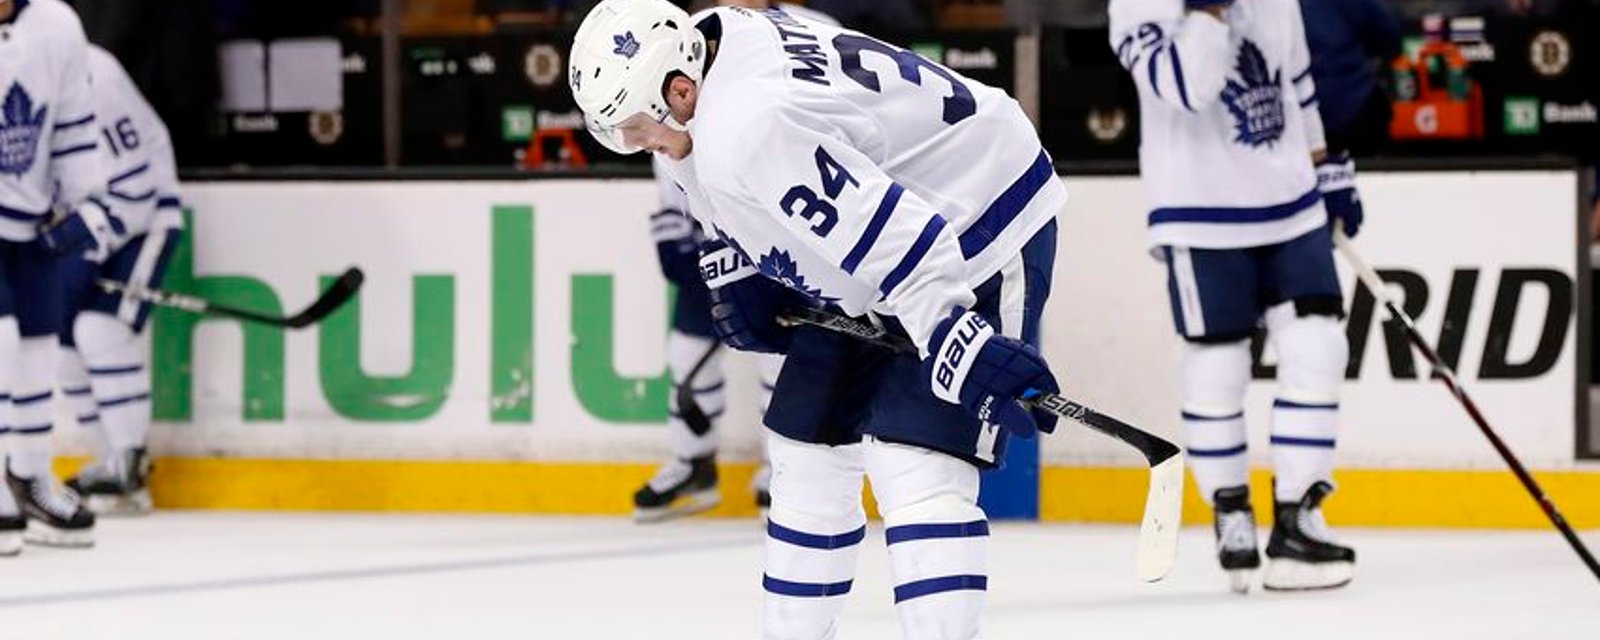 Does Matthews need to change his style of play once he returns from injury? 